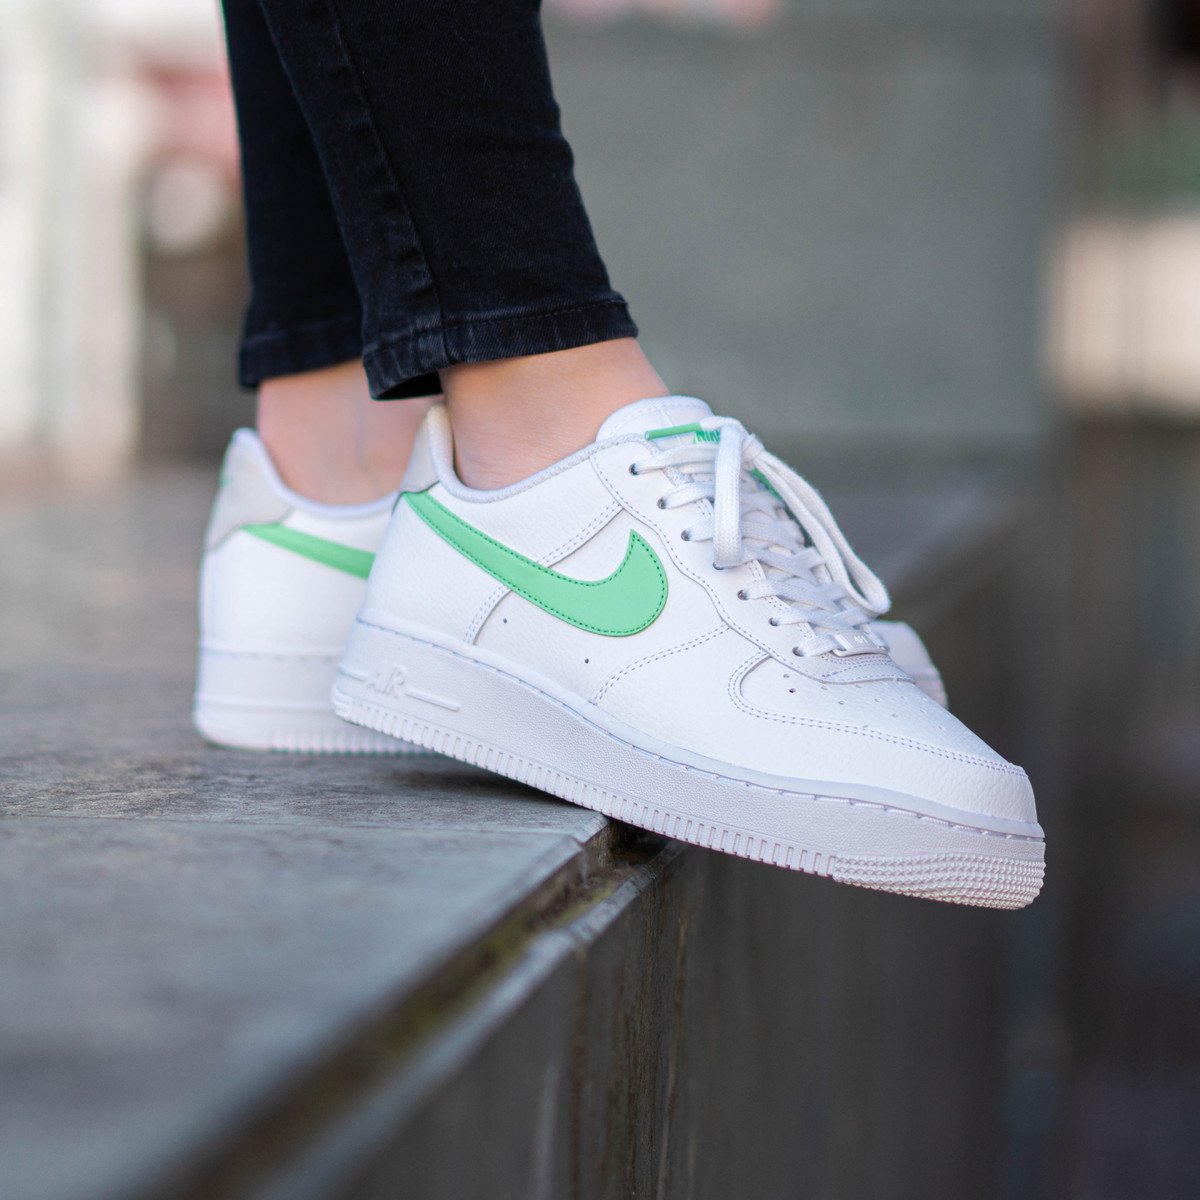 Blind Marco Polo Elendighed solefed on Twitter: "Ad: Wmns Nike Air Force 1 Low 'White/Green Glow' on  Finish Line https://t.co/AZhvD4QbKL https://t.co/yqr2zm8ltT" / Twitter